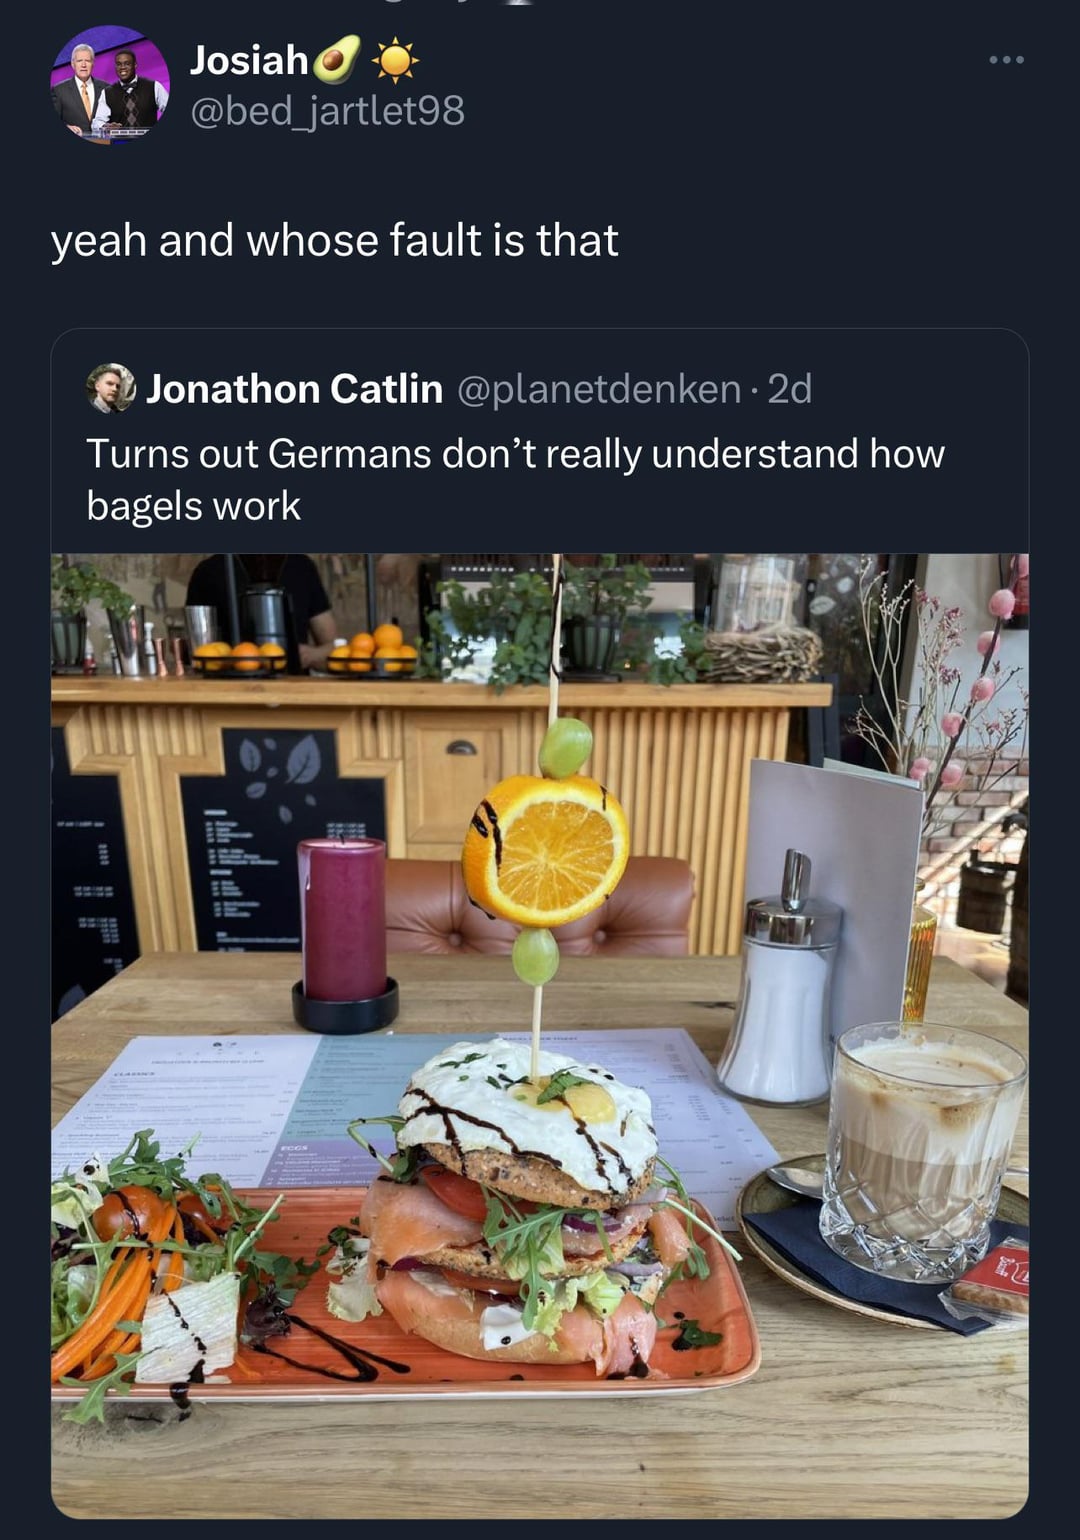 funny tweets and memes - germans don t understand bagels - E Josiah yeah and whose fault is that Jonathon Catlin . 2d Turns out Germans don't really understand how bagels work